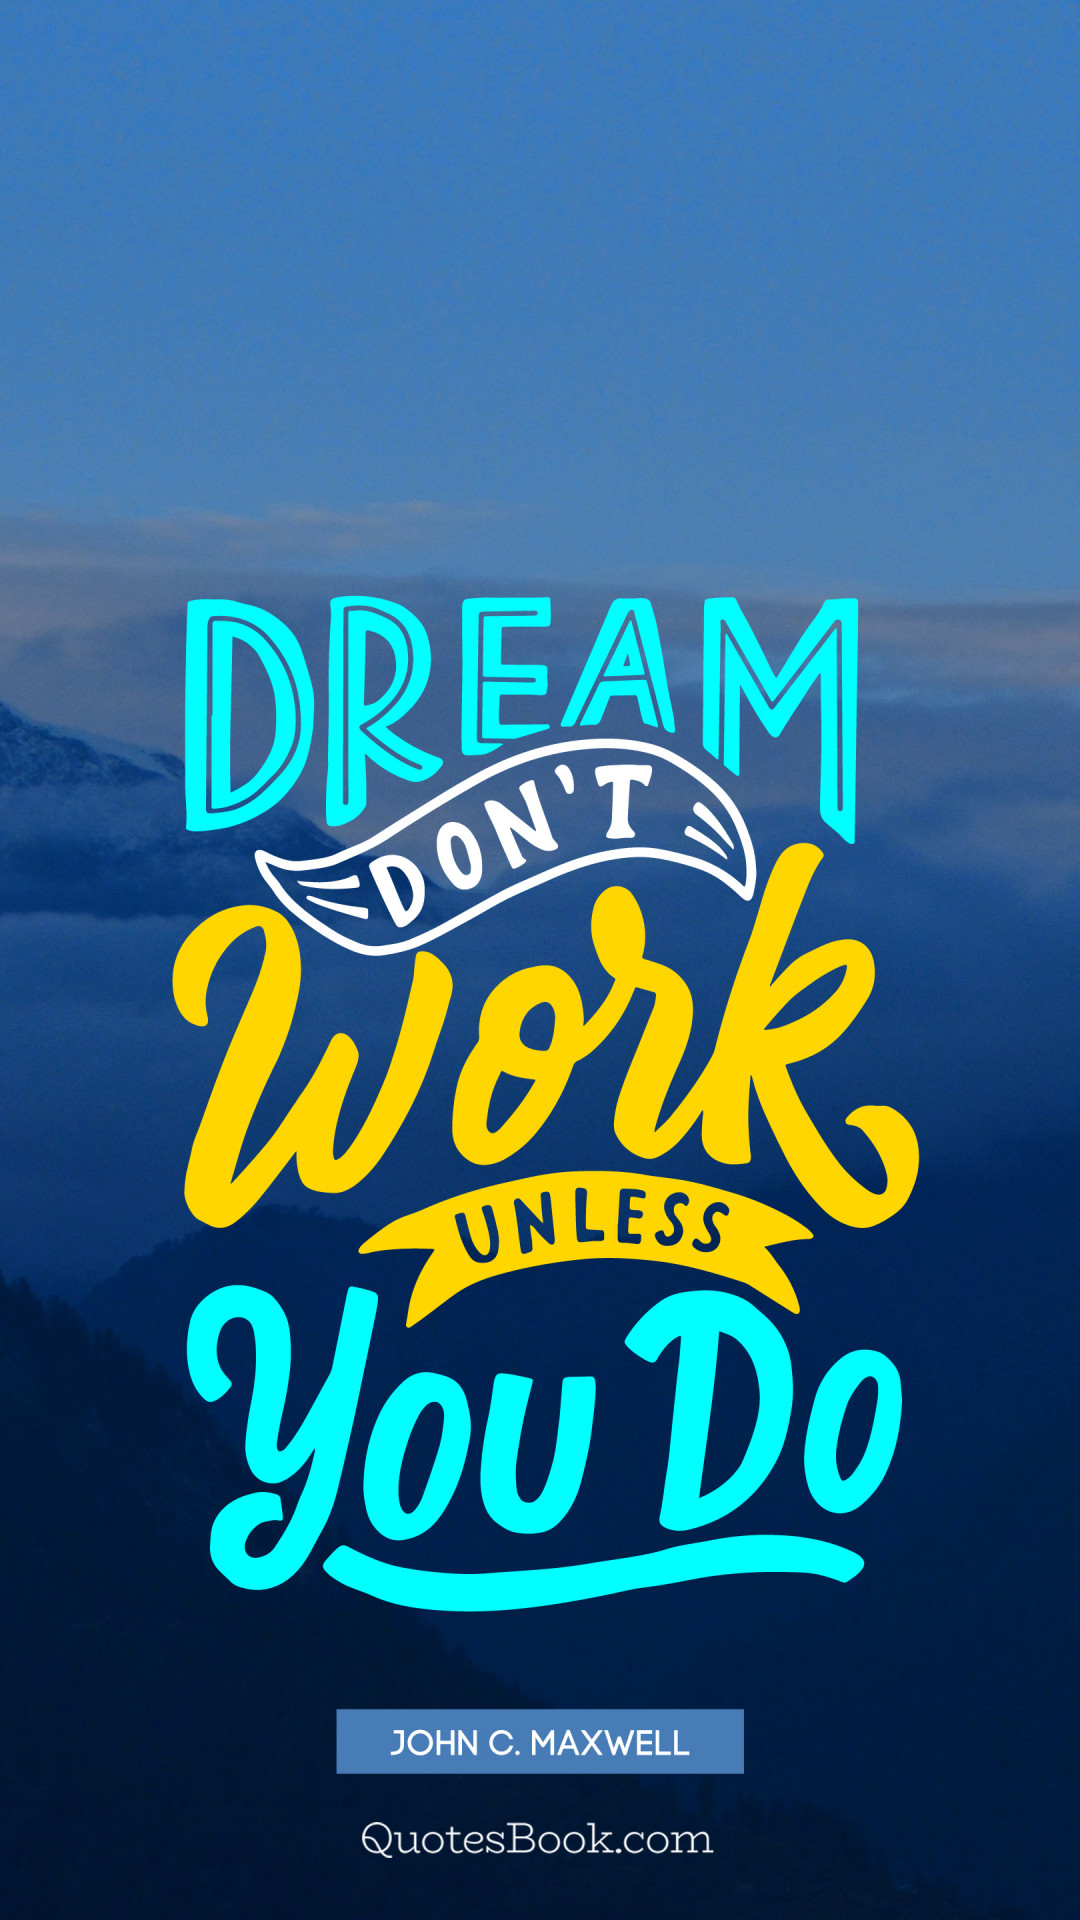 Dream don't work unless you do. - Quote by John C. Maxwell - QuotesBook